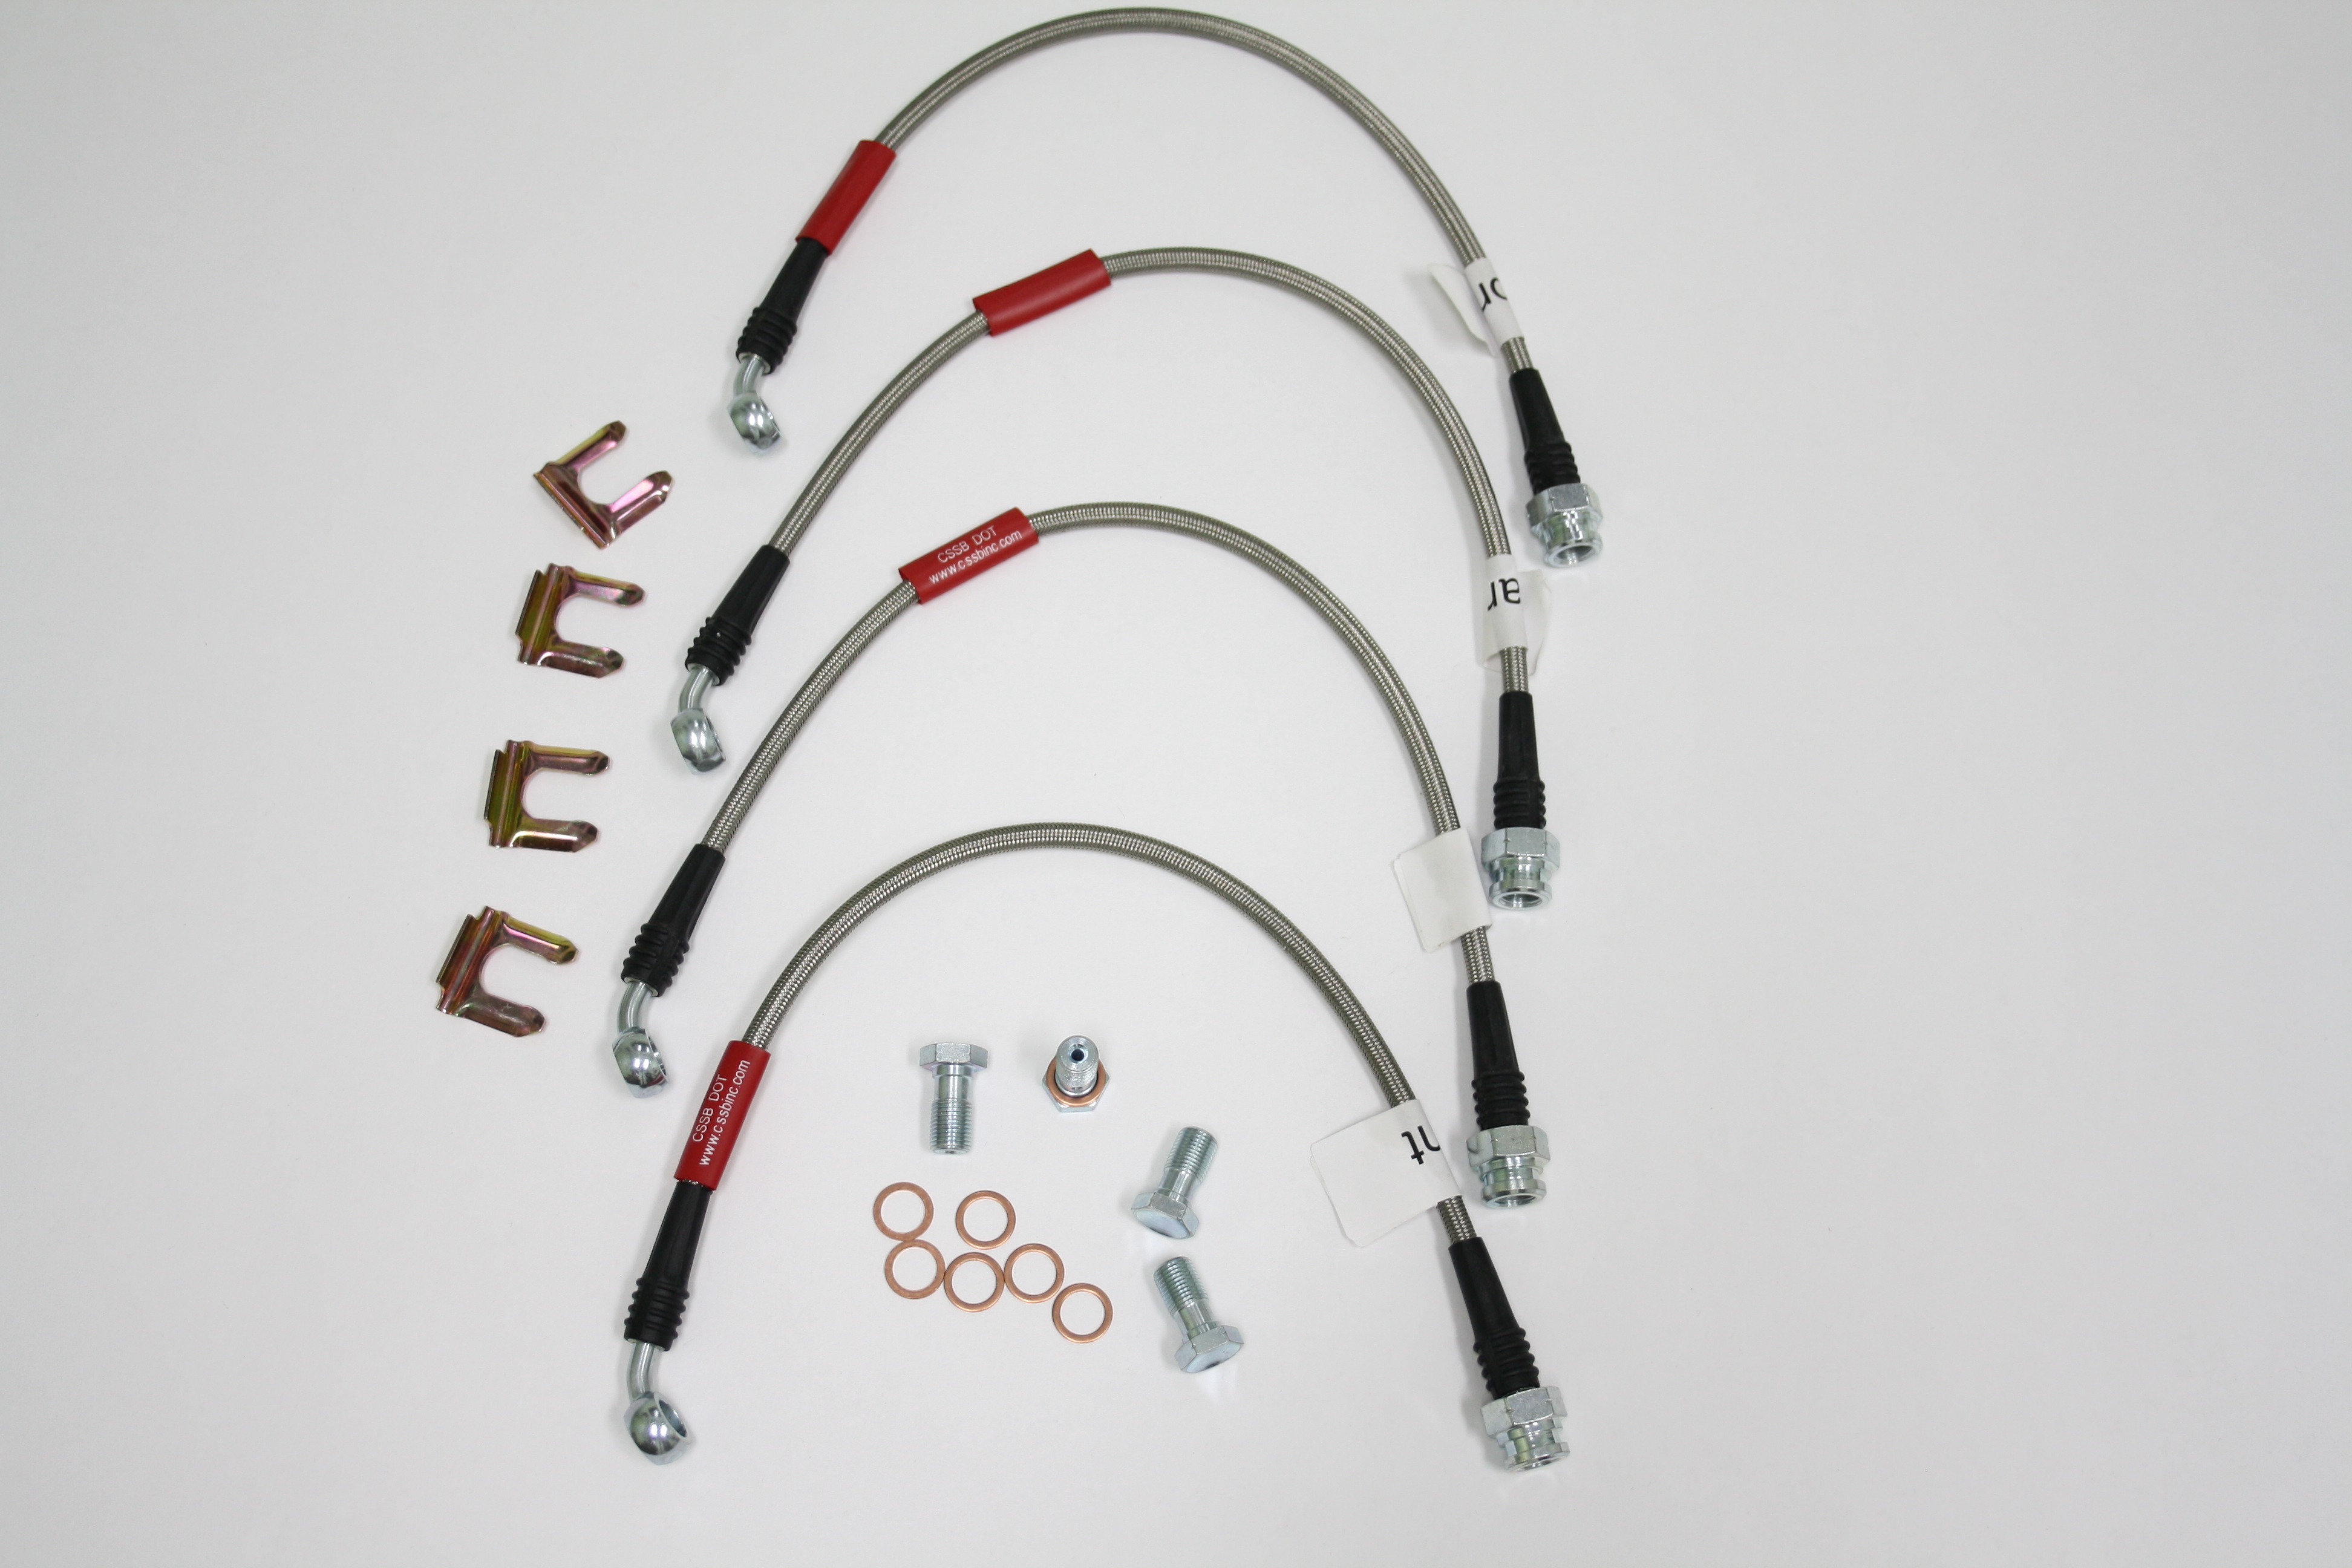 1997-2004 Corvette Brake Hose Set (Braided Stainless Steel) (4 Pieces with Hardware)